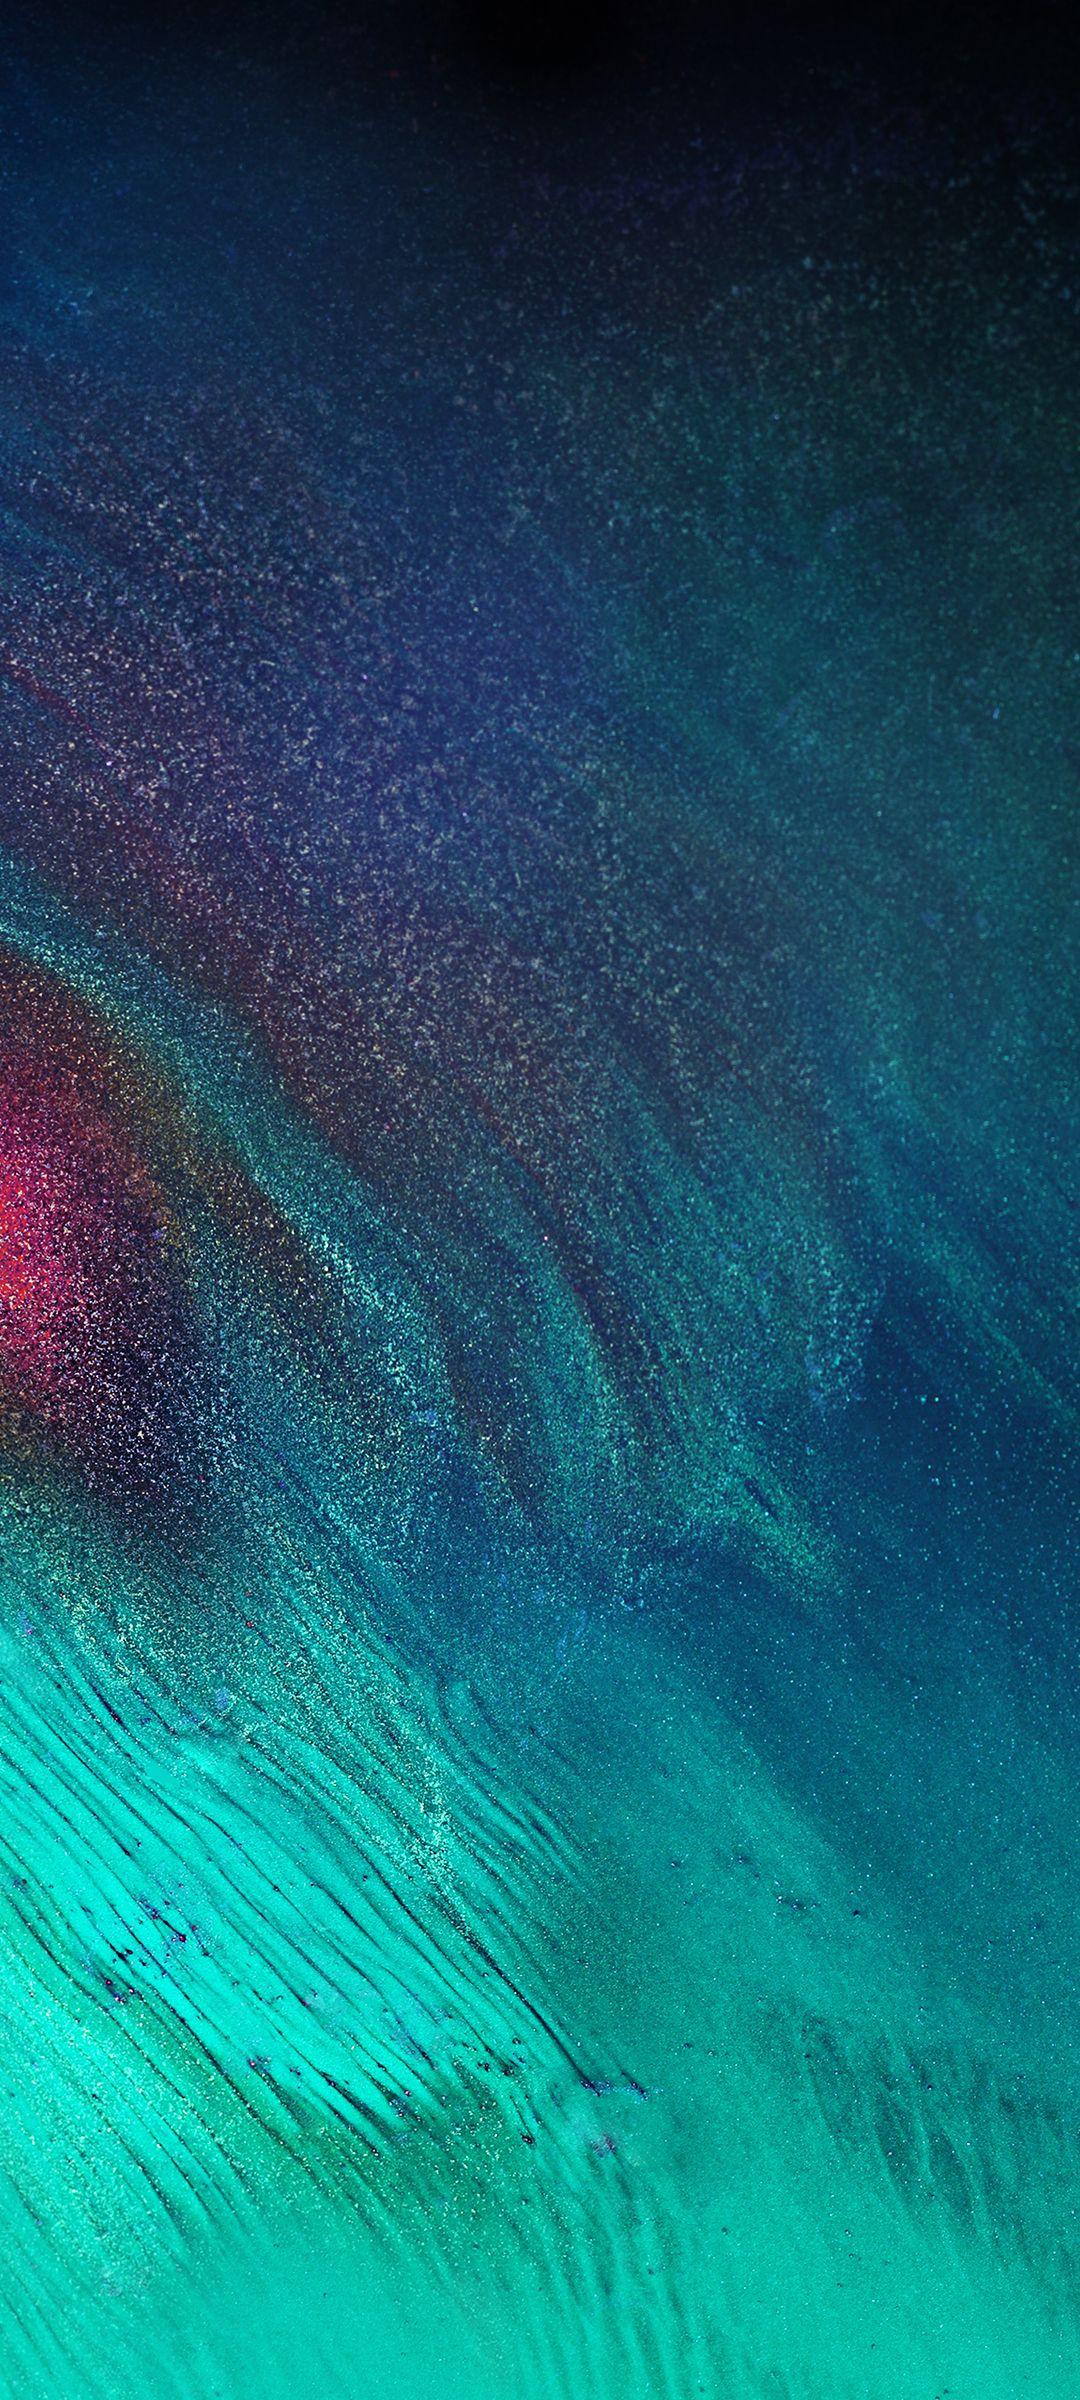 Samsung Galaxy A70 Stock Wallpapers 02